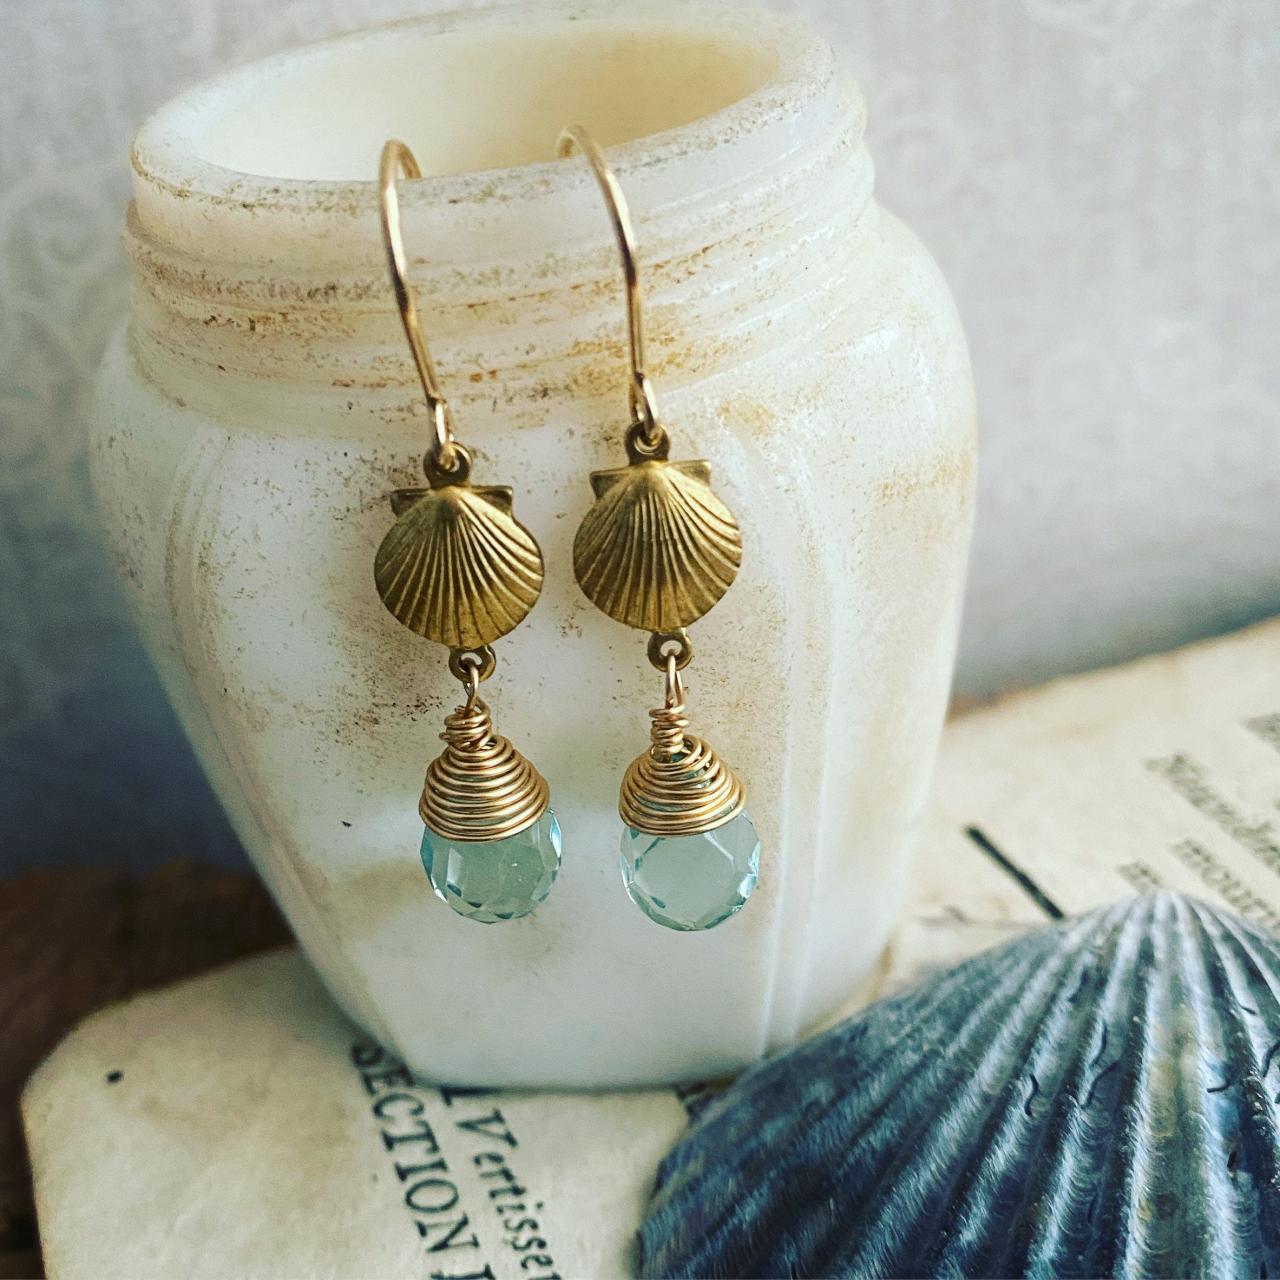 Brass Scallop Earrings With Aqua Crystal Beachy Jewelry Charm Jewelry Gold Earrings Beach Weddings Bridesmaid Jewelry Gifts Under 40